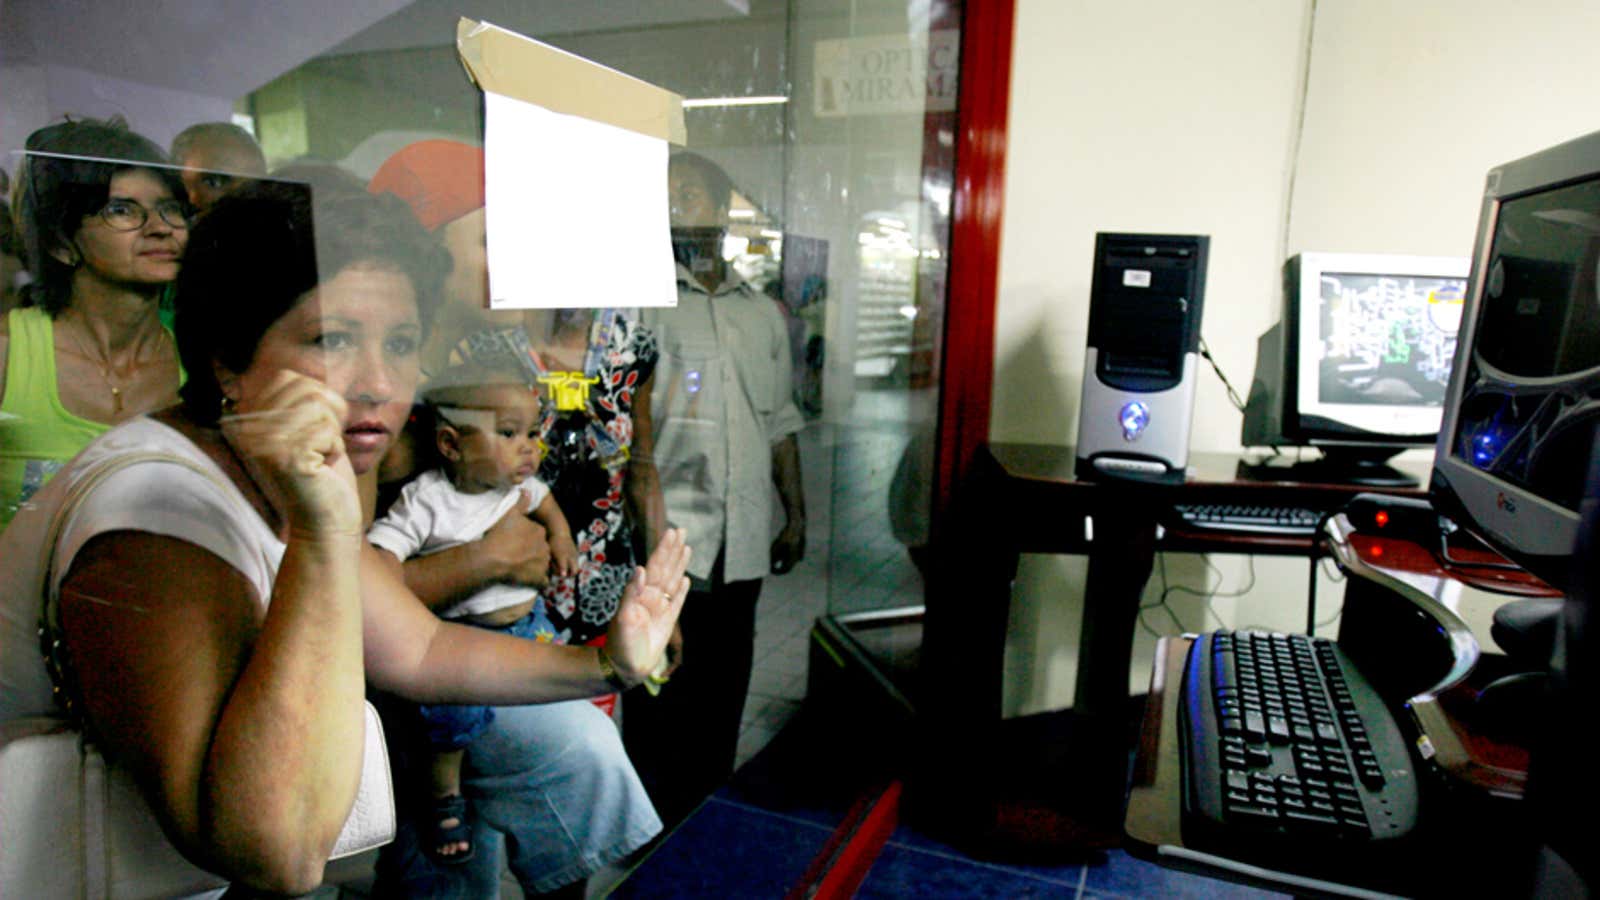 Desktop computers only went on sale to the general public in Cuba in 2008.